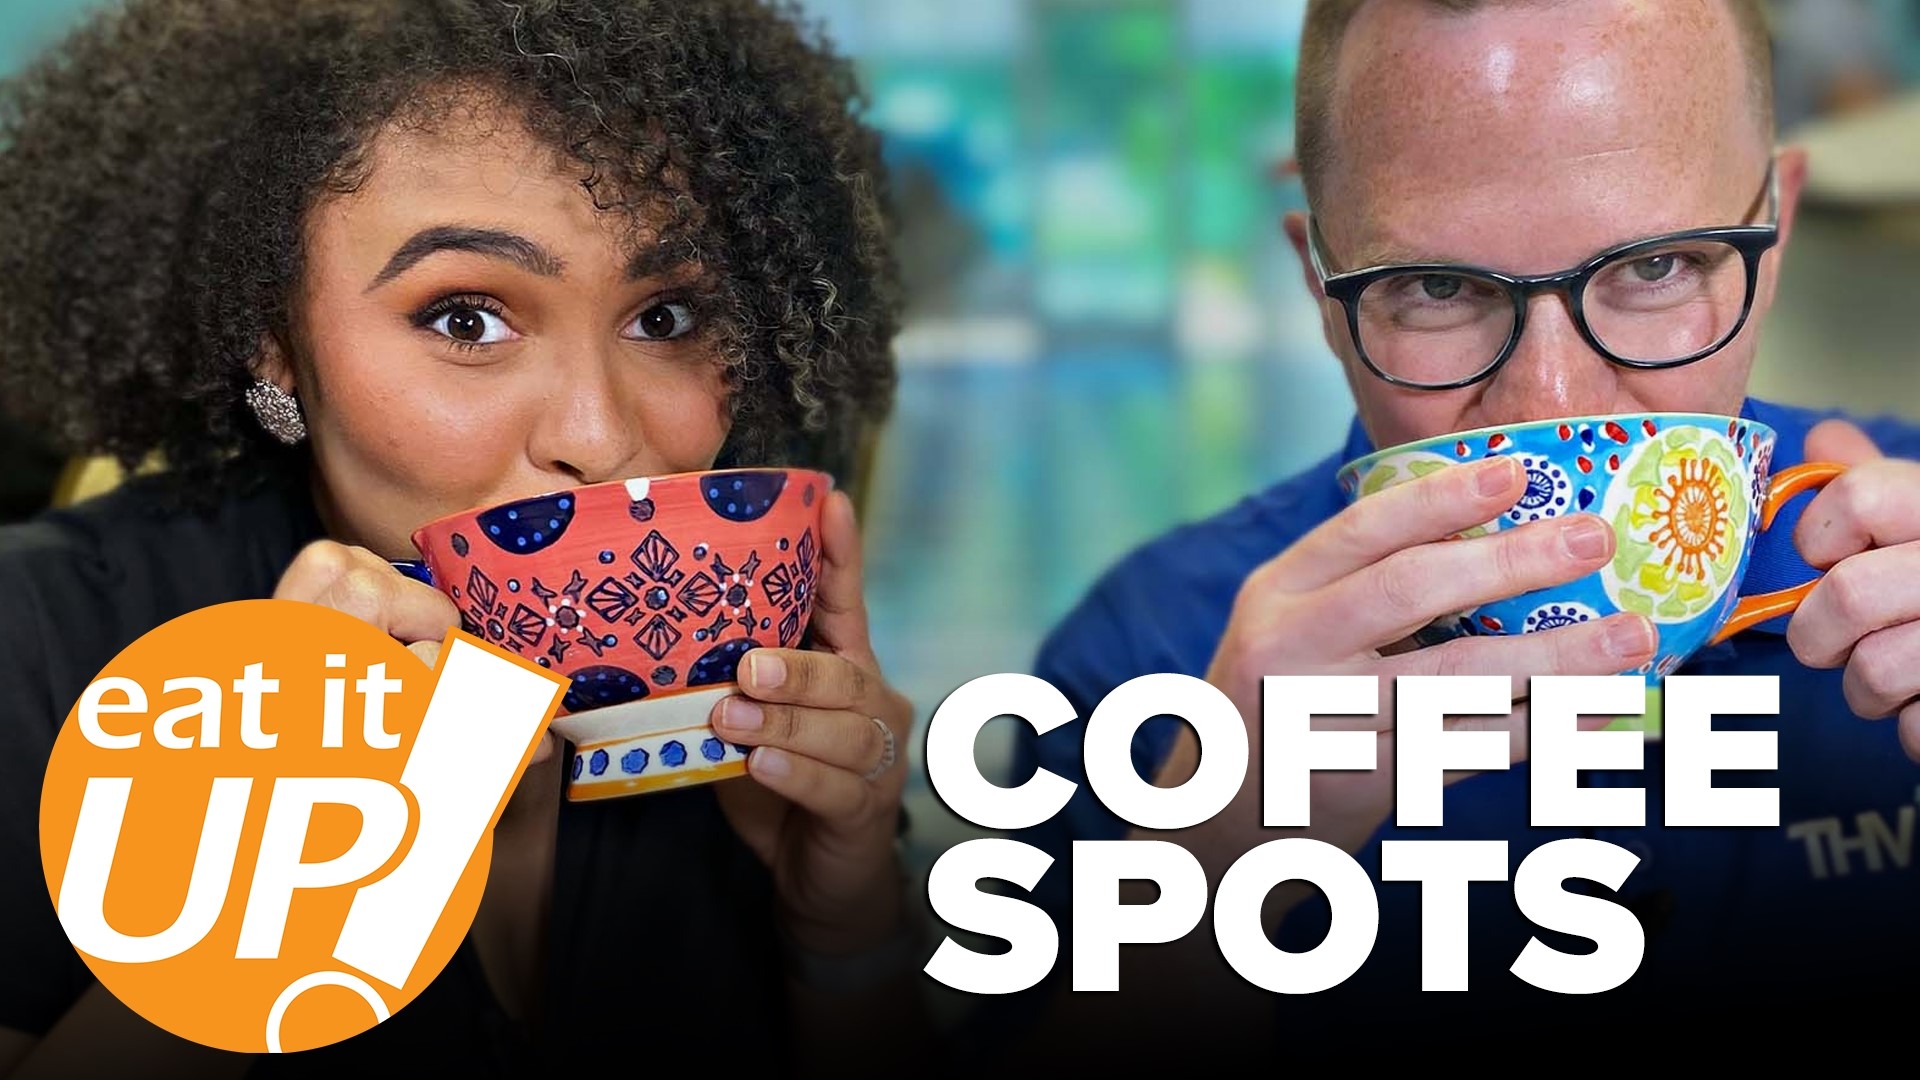 In this episode, Skot Covert and friends take you to the best coffee spots we could find around Central Arkansas.